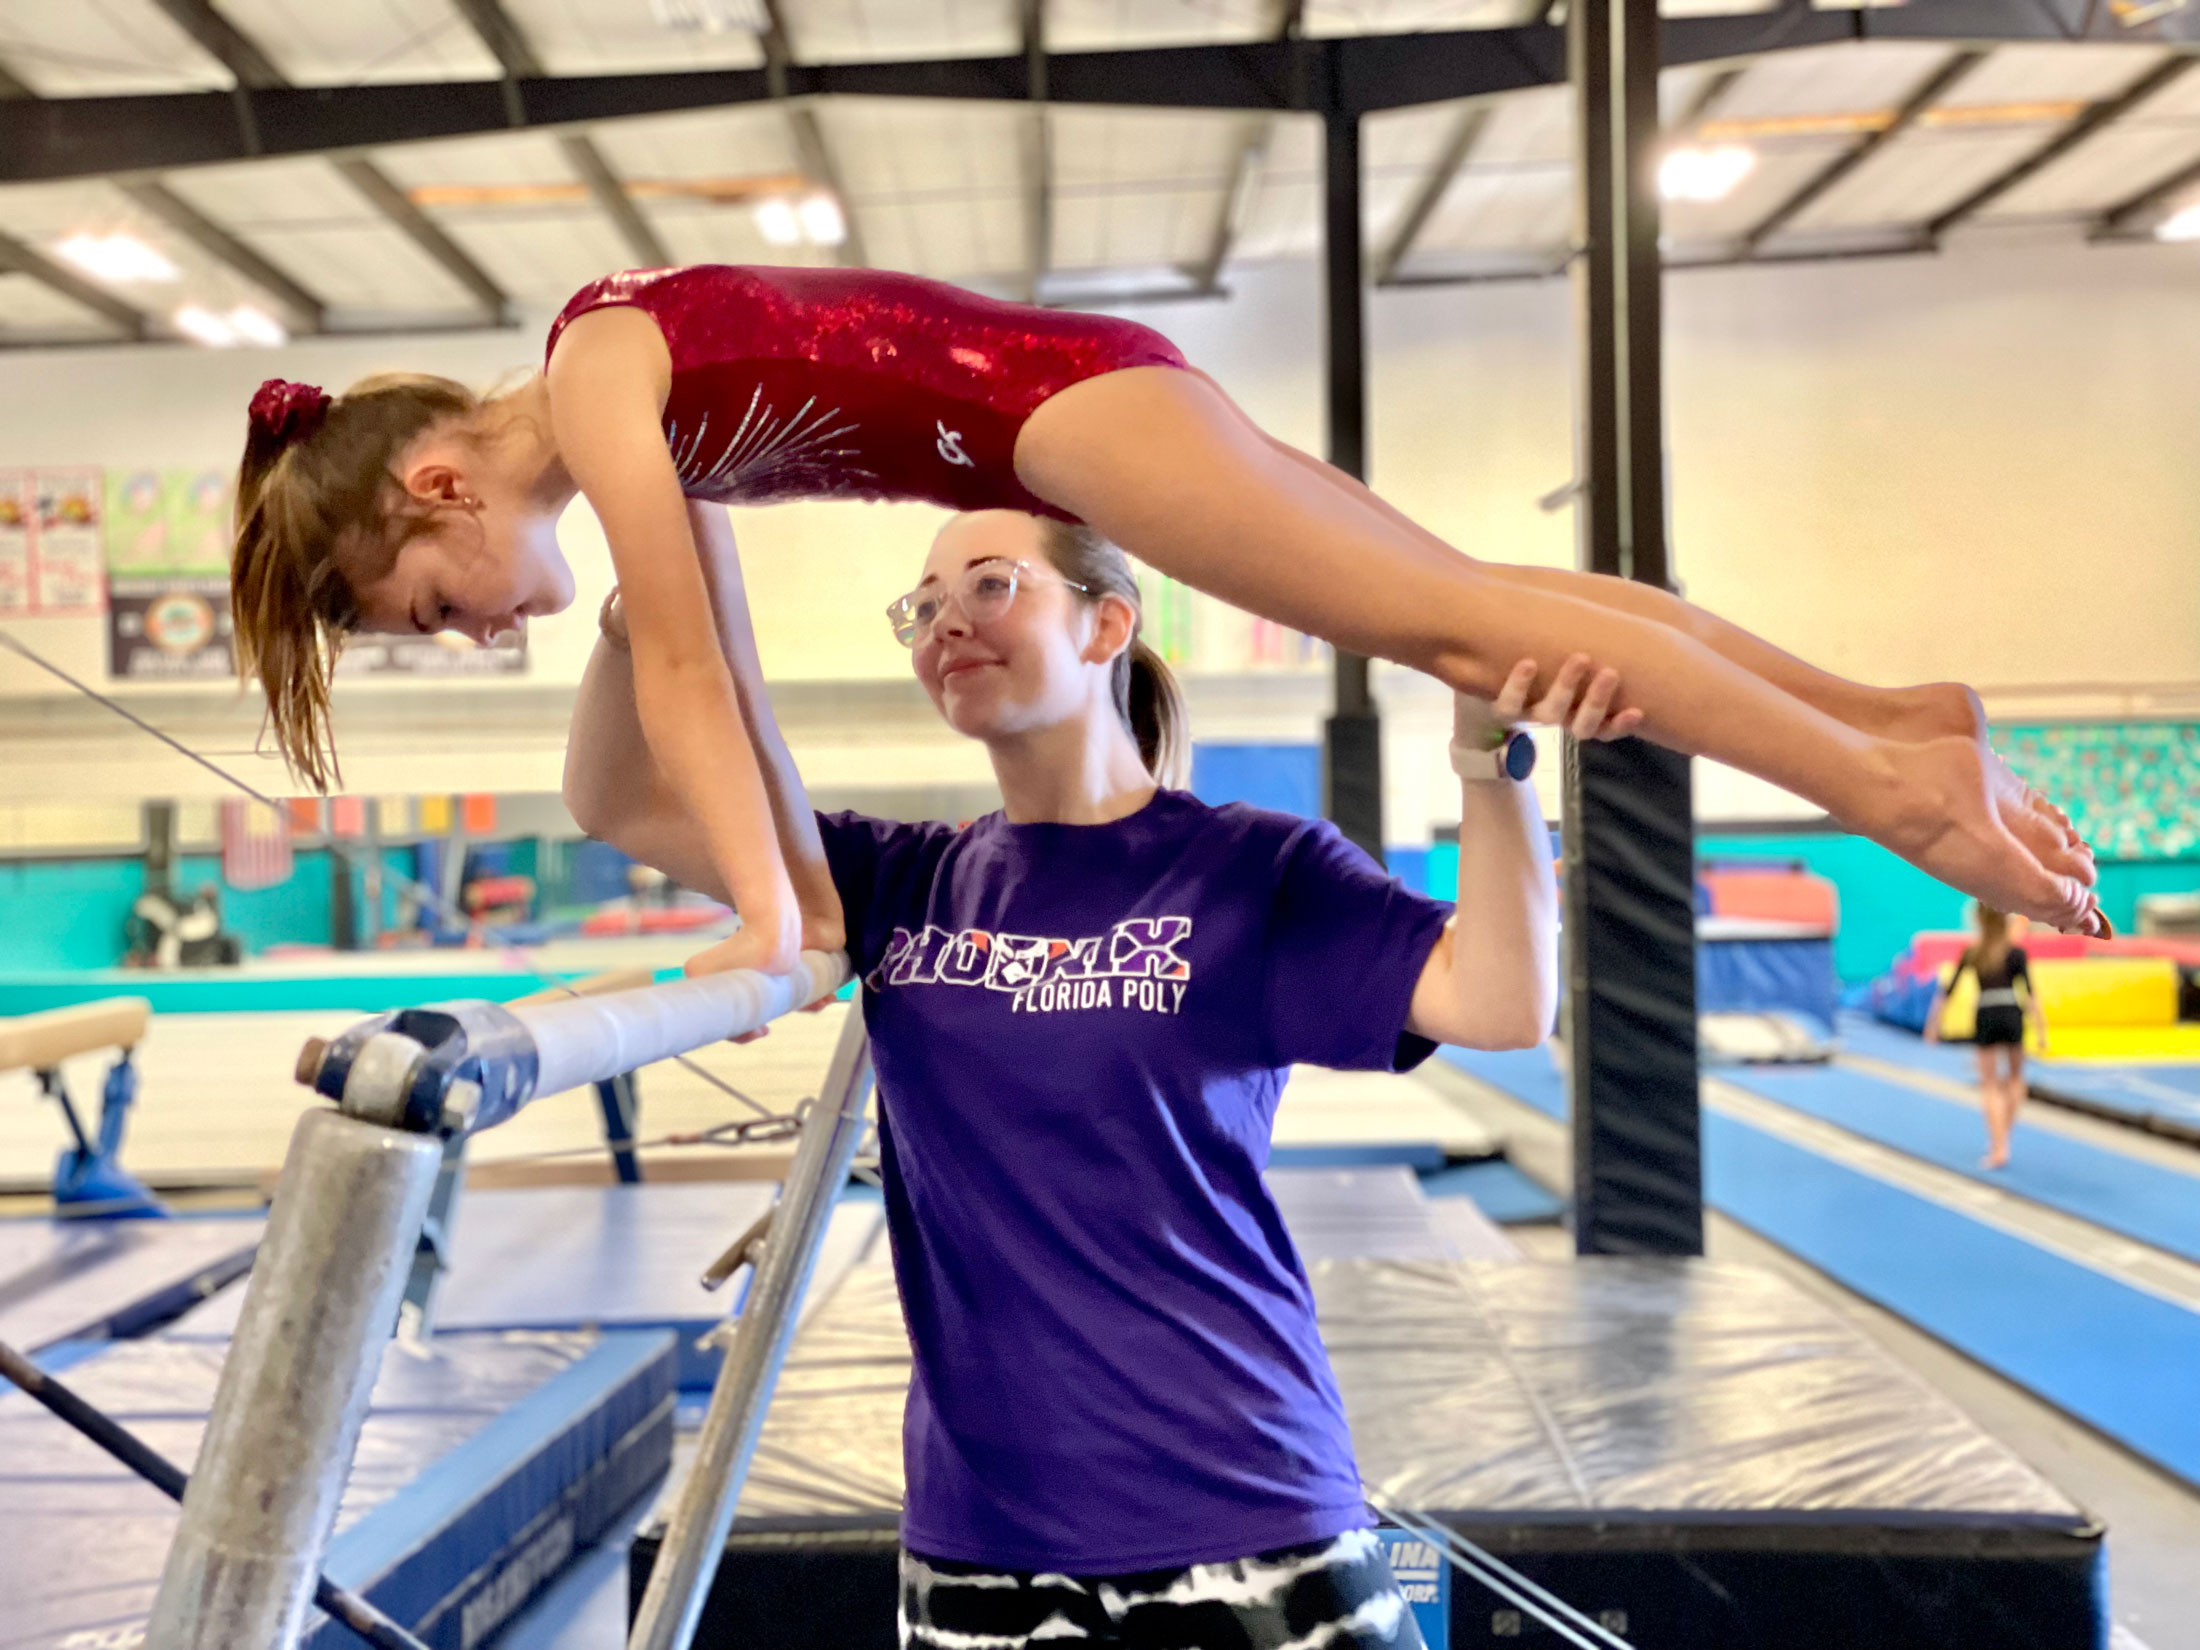 Gymnast-turned-coder at Florida Poly inspires on and off the mat